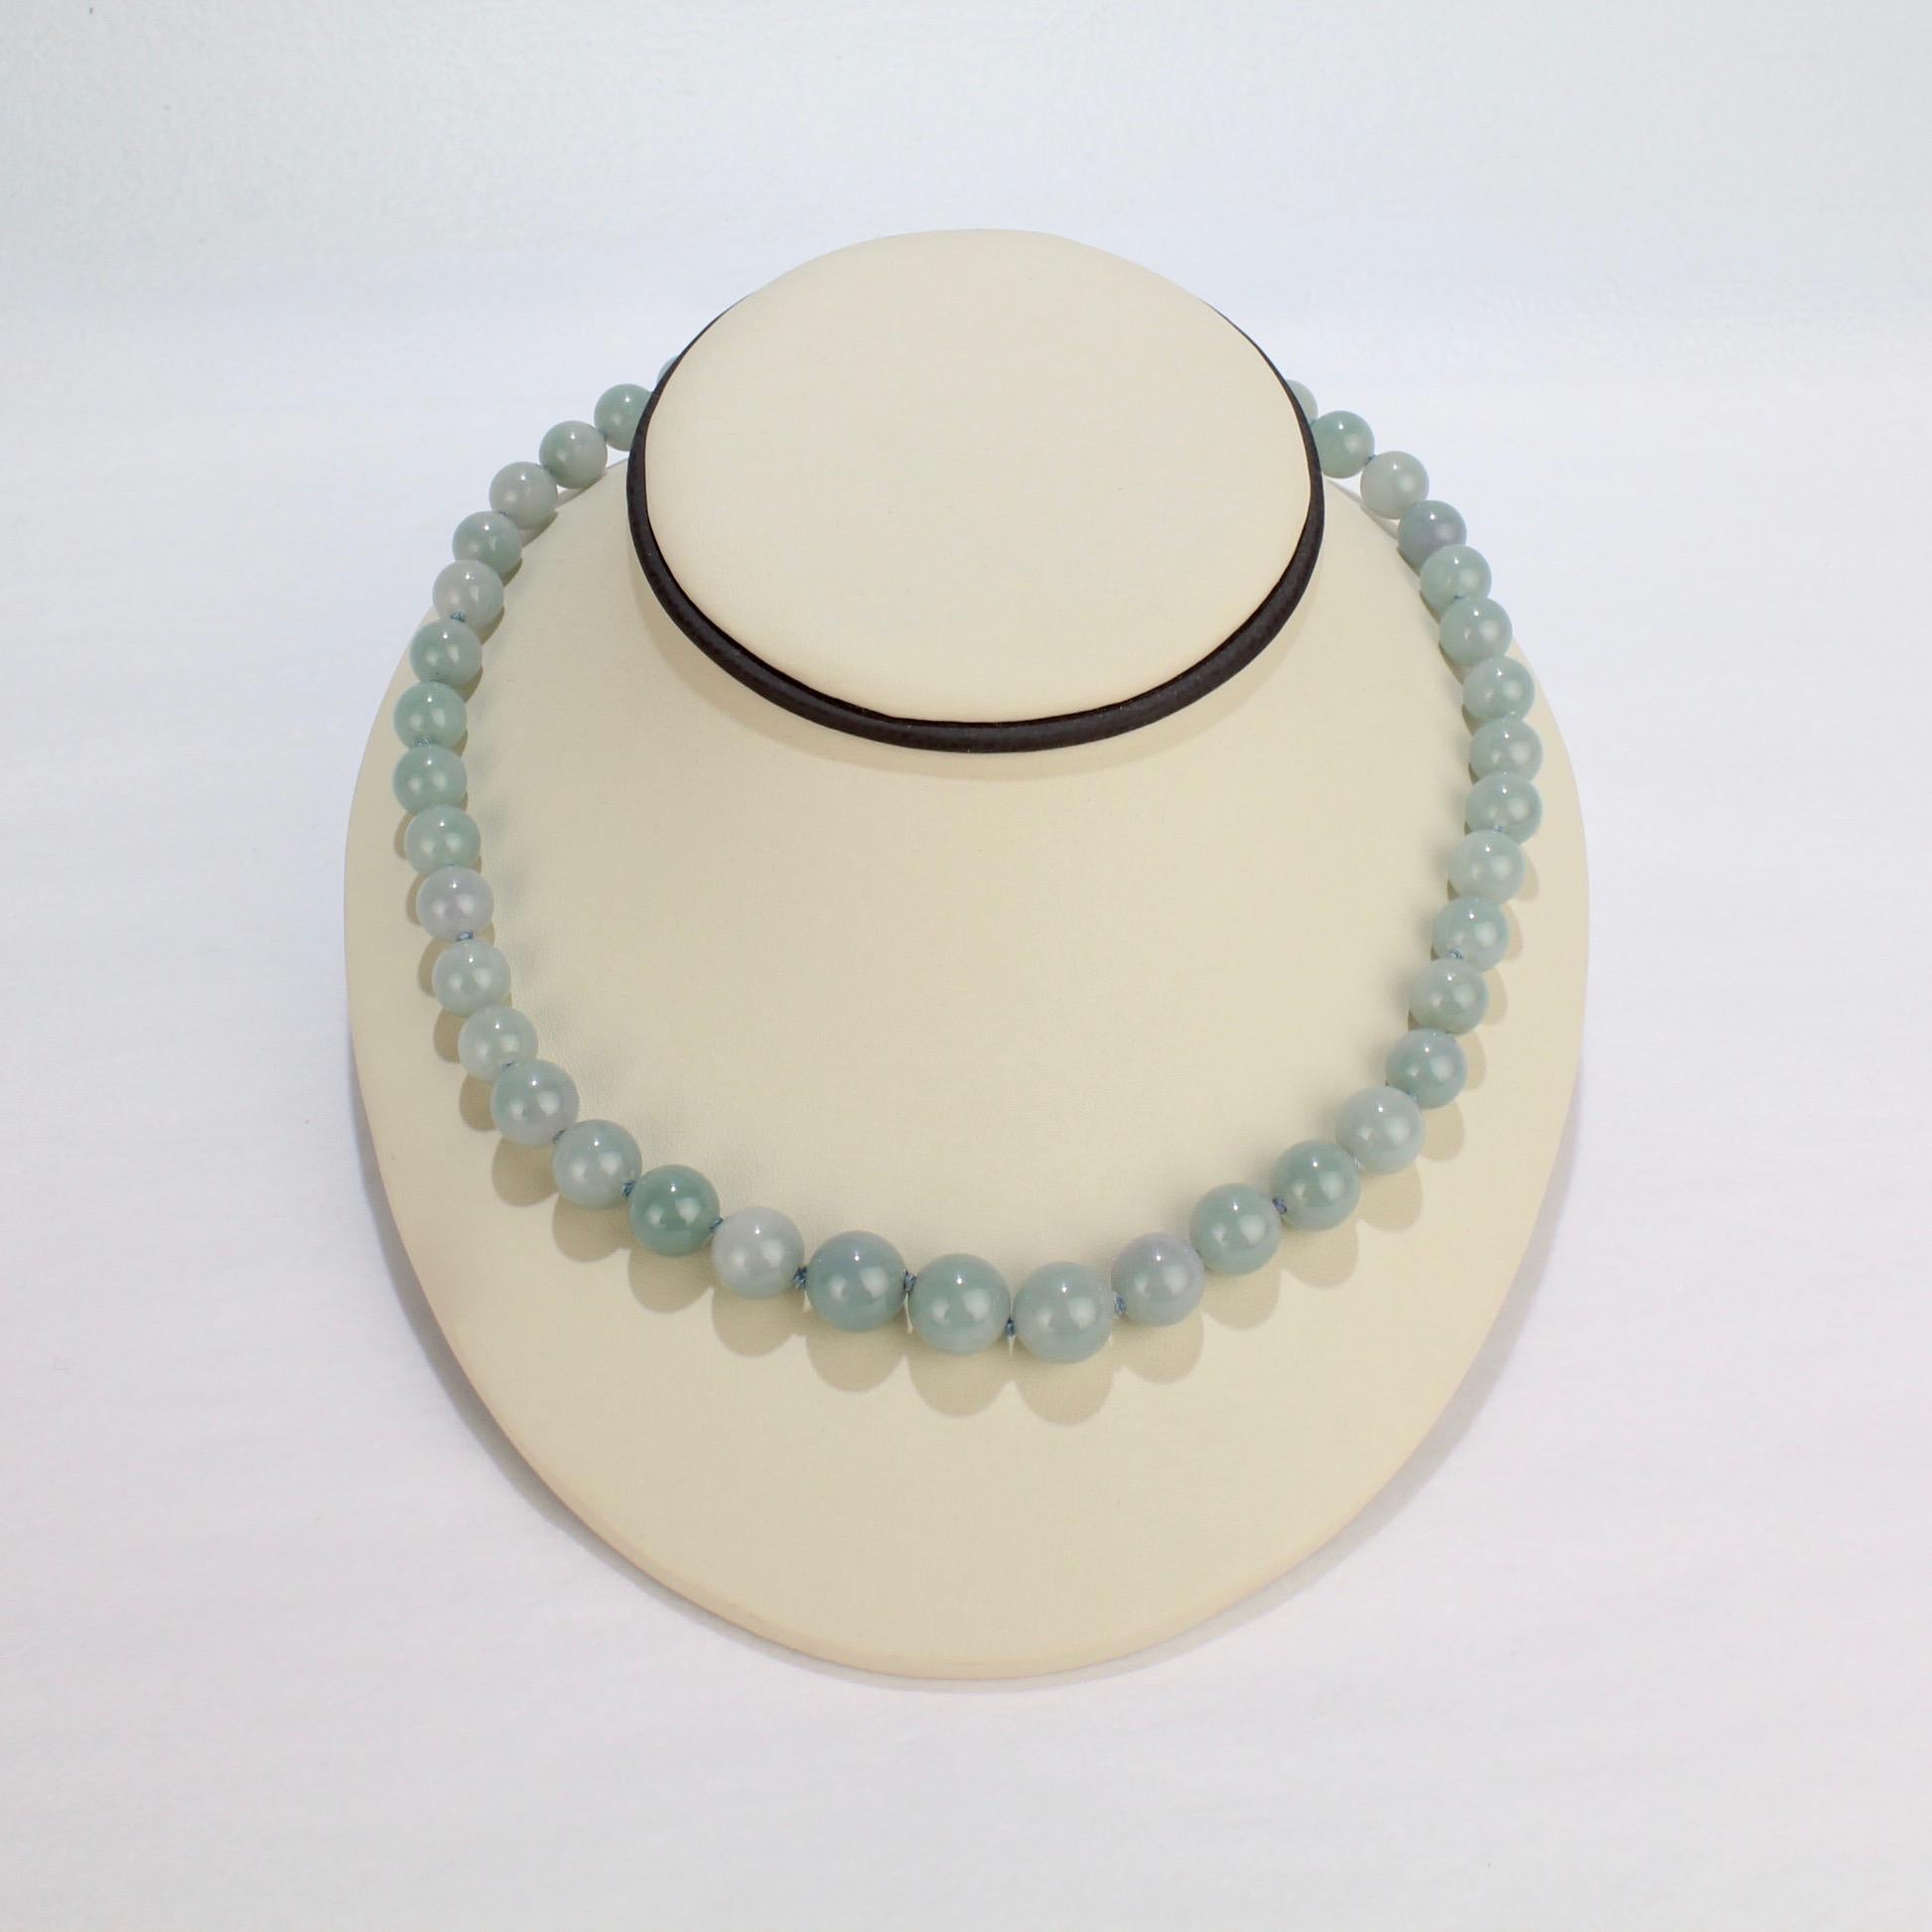 A good, vintage Chinese beaded jade necklace.

With 43 hand knotted, graduated celadon jadeite beads.

Wearing jade is thought to bring positive energy and confer good luck!

From a Pennsylvania estate.

Length: ca. 500 mm (or 19 1/2 in.)
Largest